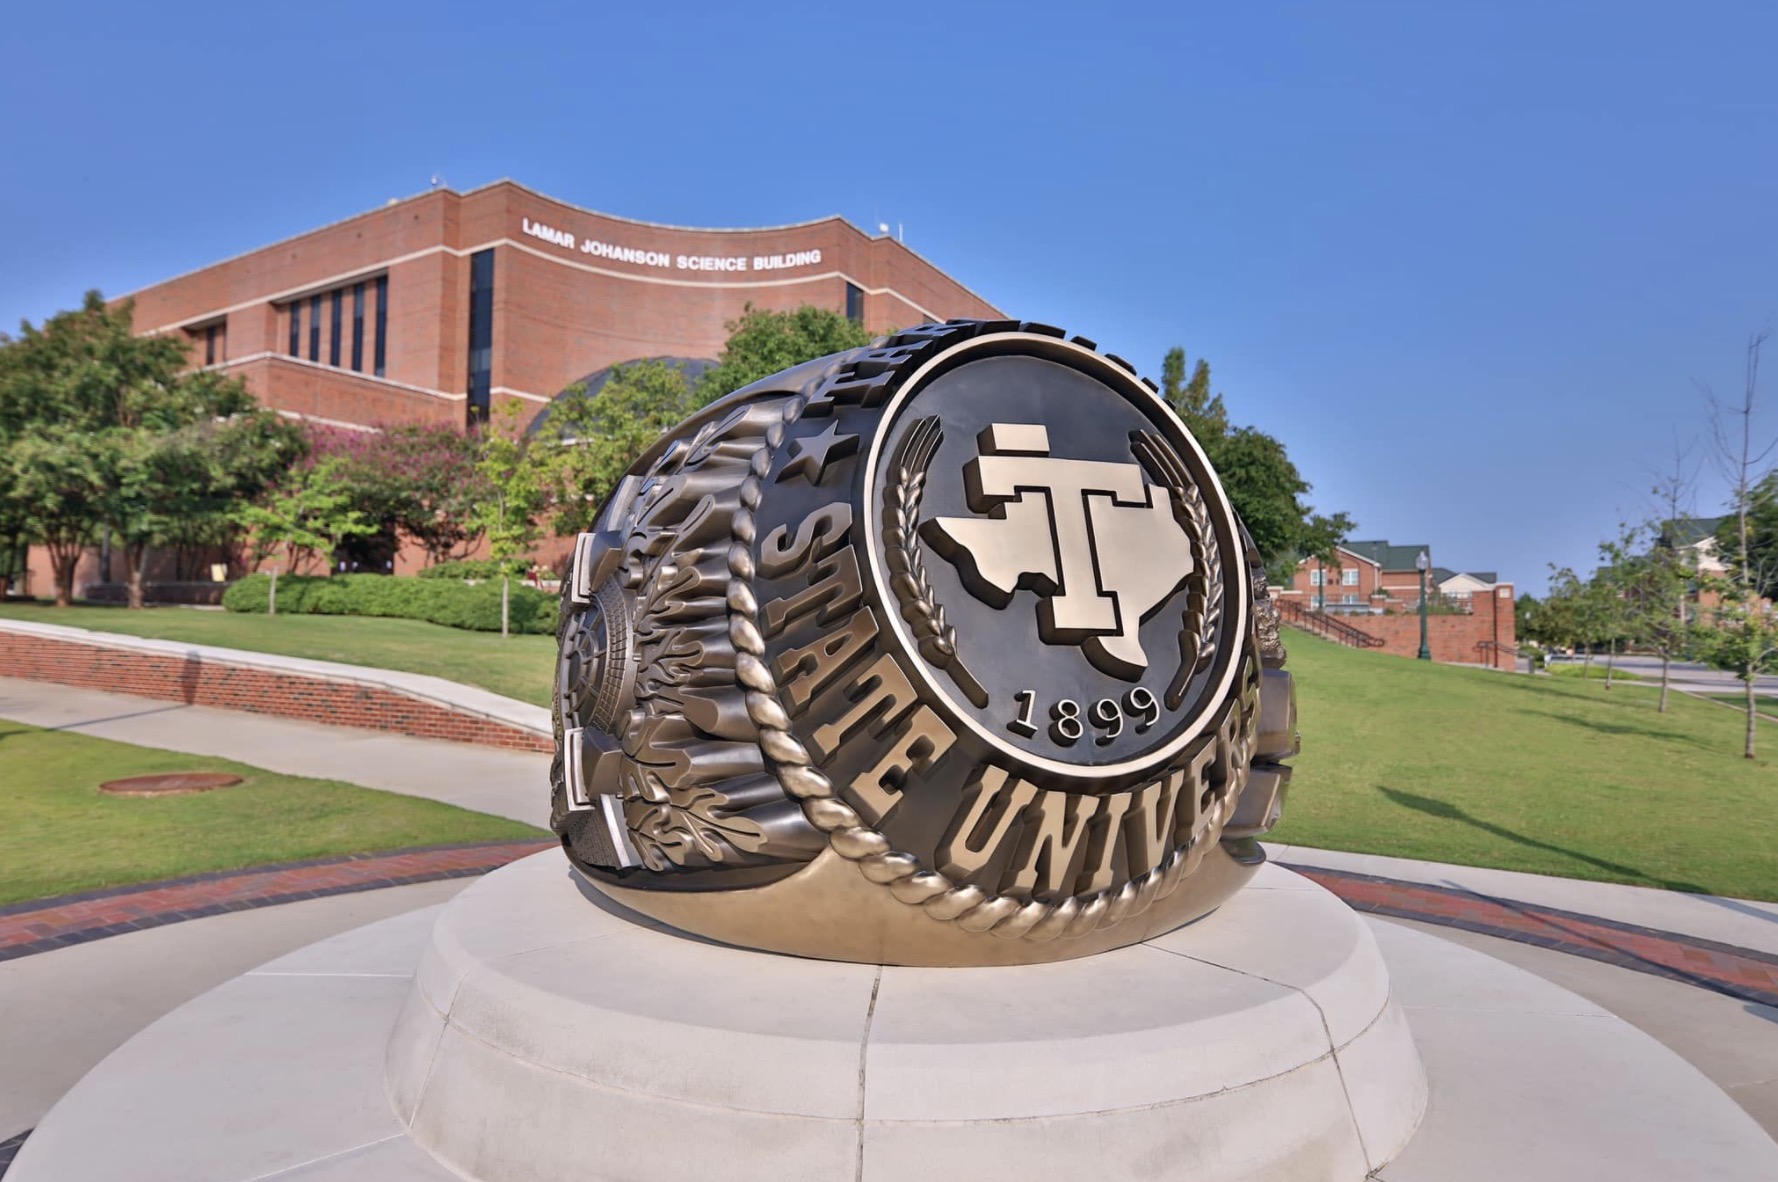 Tarleton State University's Official Ring statue is both a landmark on campus and of the innovation behind the Tarleton/Jostens Official Ring partnership.  